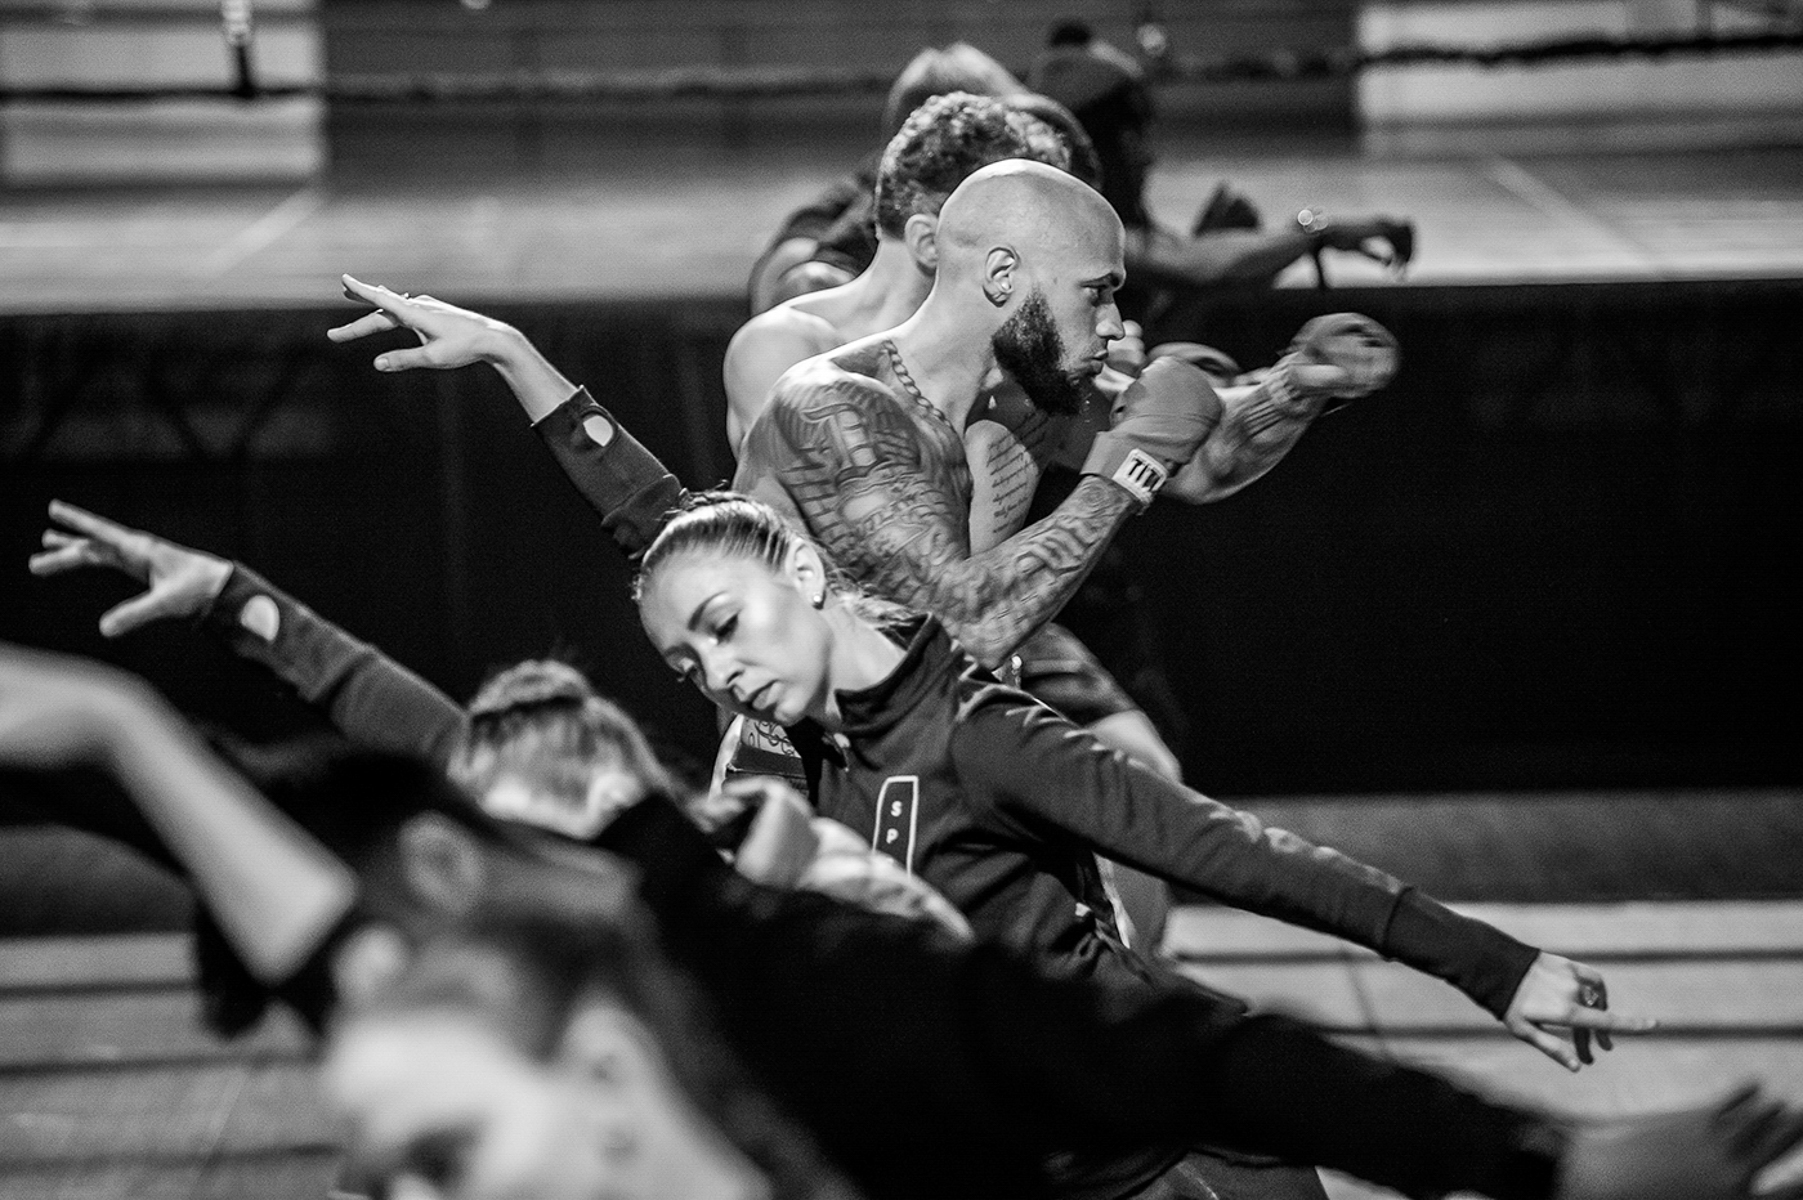 St. Paul Ballet dancers and Element Gym boxers rehearse for their collaborative performance, “The Art of Boxing, The Sport of Ballet,” on October 13, 2017 in St. Paul, MN.